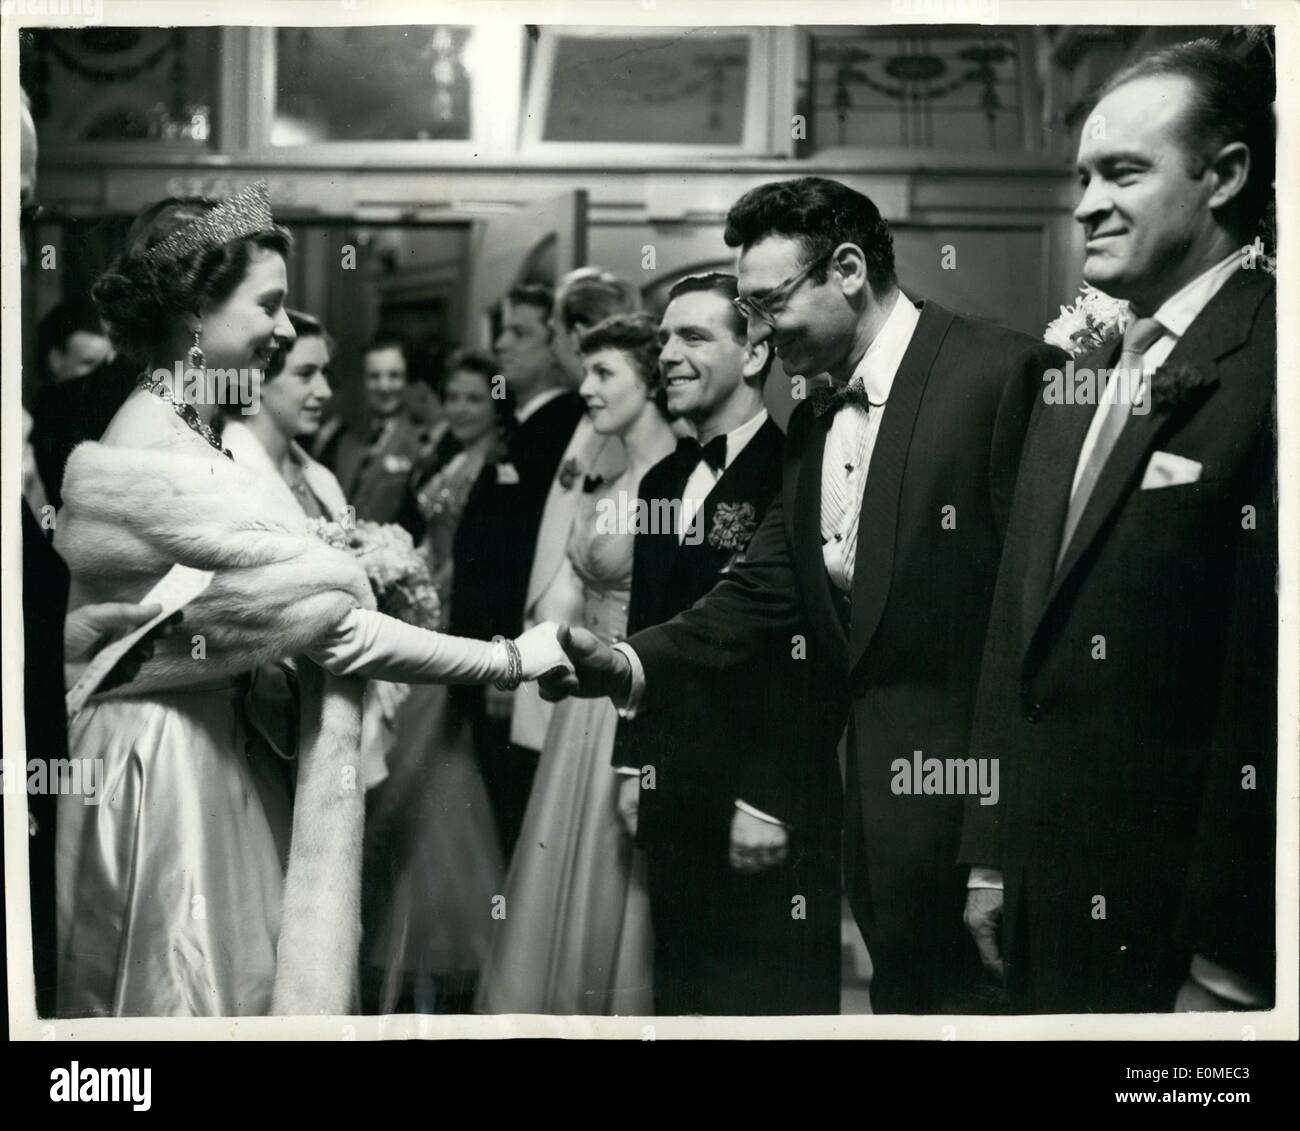 Nov. 11, 1954 - Royal Veriety performance at London Palladium. Queen with Frankie Laine. Photo Shows:- Queen shakes hands with Frankie Laine - next to him is NORMAN WISDOM - Princess Margaret looks on.. On right is BOB HOPE - after the Royal variety Performance at the London Palladium. Stock Photo